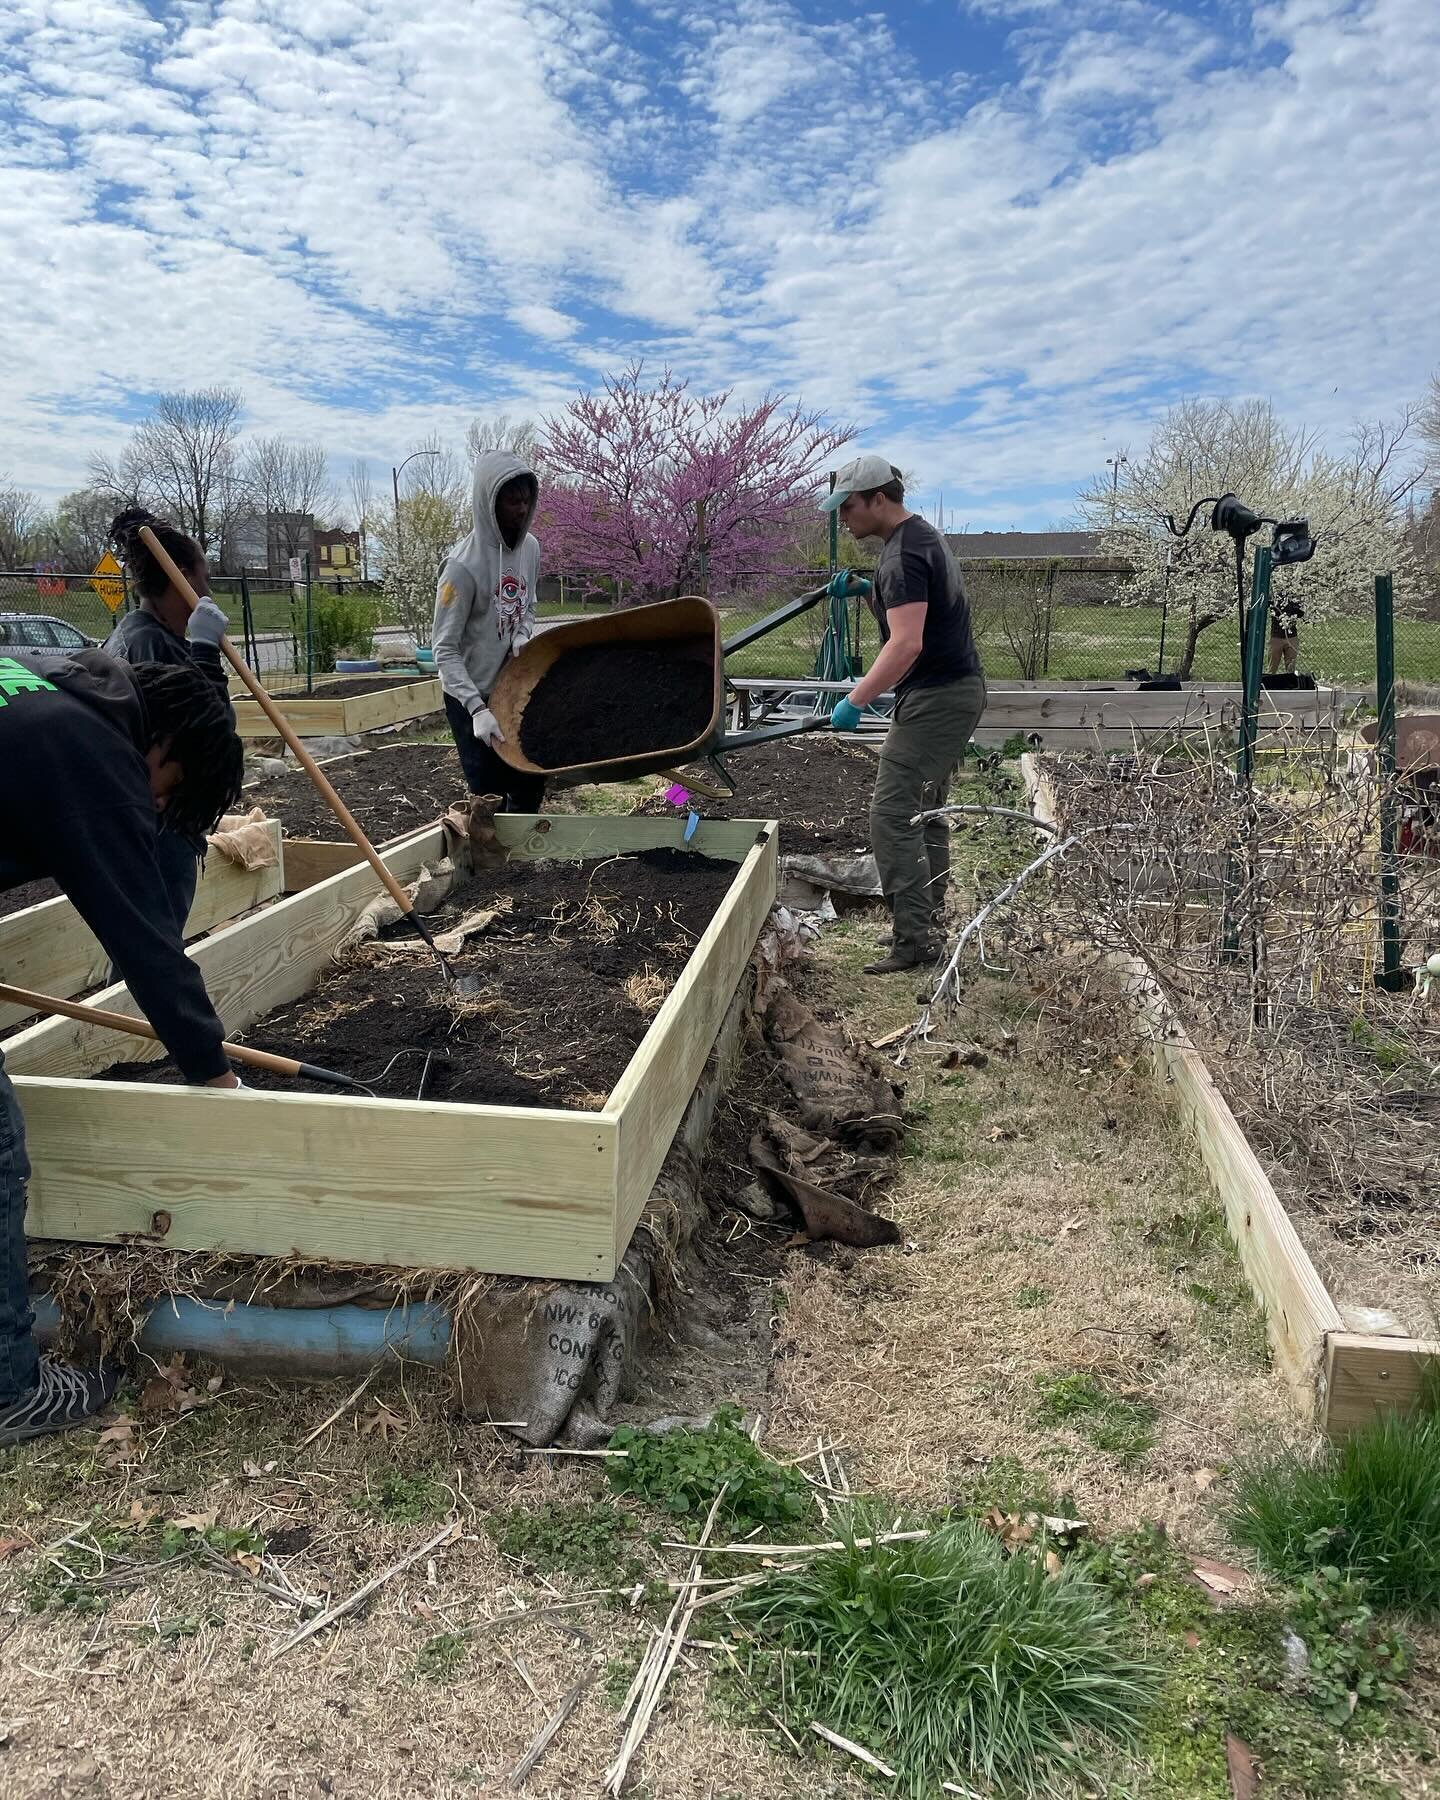 We had an incredible staff work day today at Fresh Starts! In about 3 hours with the help of our amazing volunteers we able to:

1) built 2 sets of shelves 
2) built 7 -SEVEN second layer of raised beds
3) FILLED most of those beds with soil
4) built